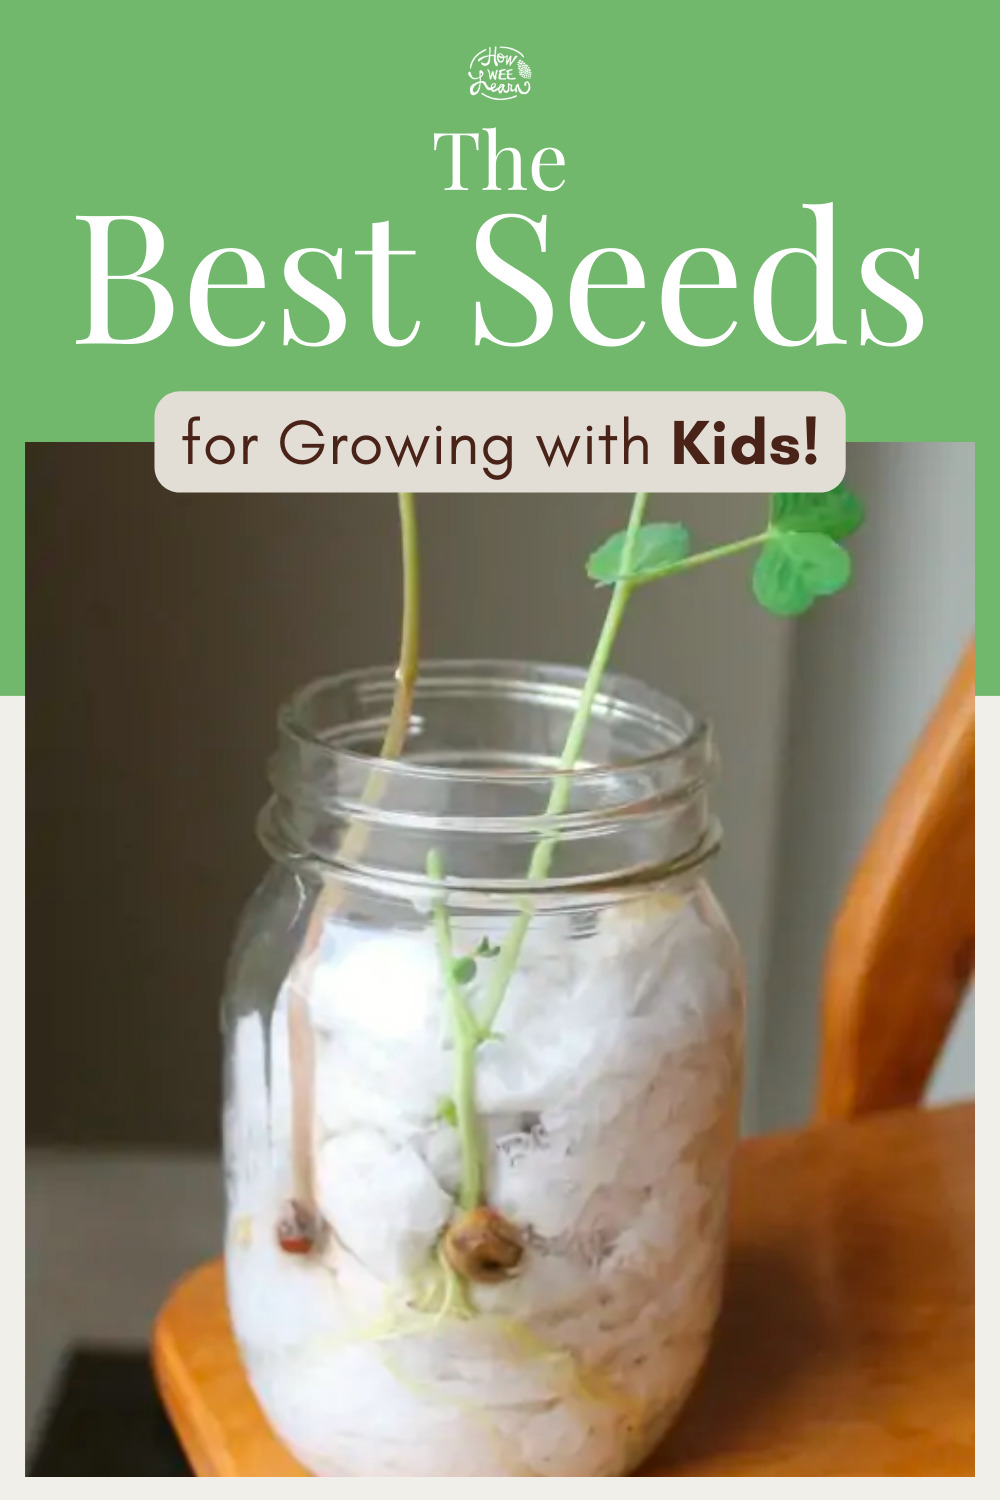 The Best Seeds for Growing with Kids: Seed Germination for Kids